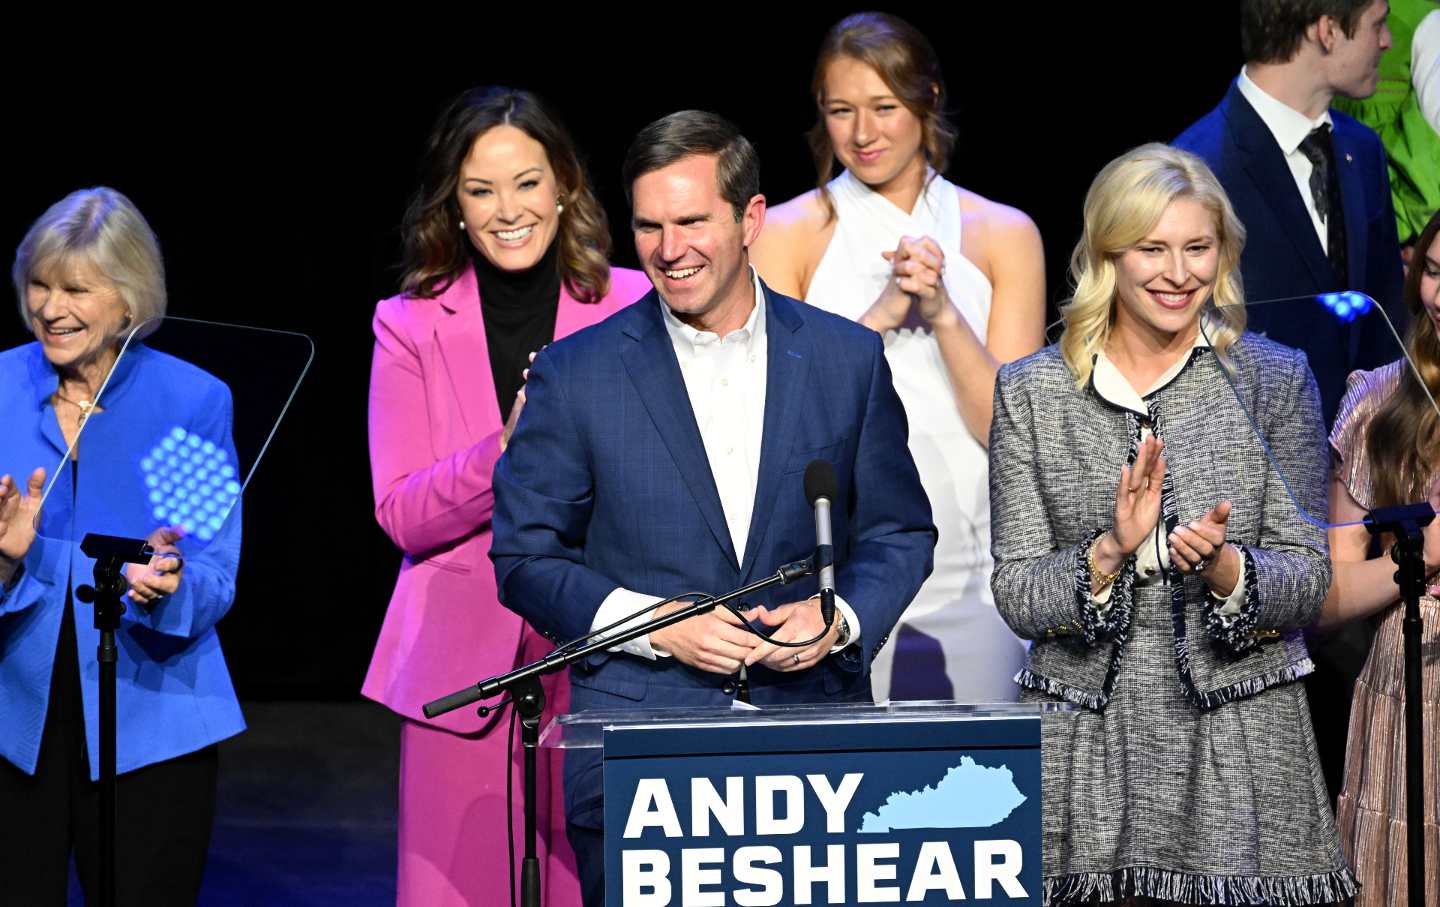 Outgoing Democratic Governor of Kentucky Andy Beshear joins his wife, Brittany Beshear (R), Kentucky Lieutenant Governor Jacqueline Coleman (CL) and her family as he celebrates his victory to the crowd at an election night event at Old Forester's Paristown Hall gave a speech.  On November 7, 2023 in Louisville, Kentucky.